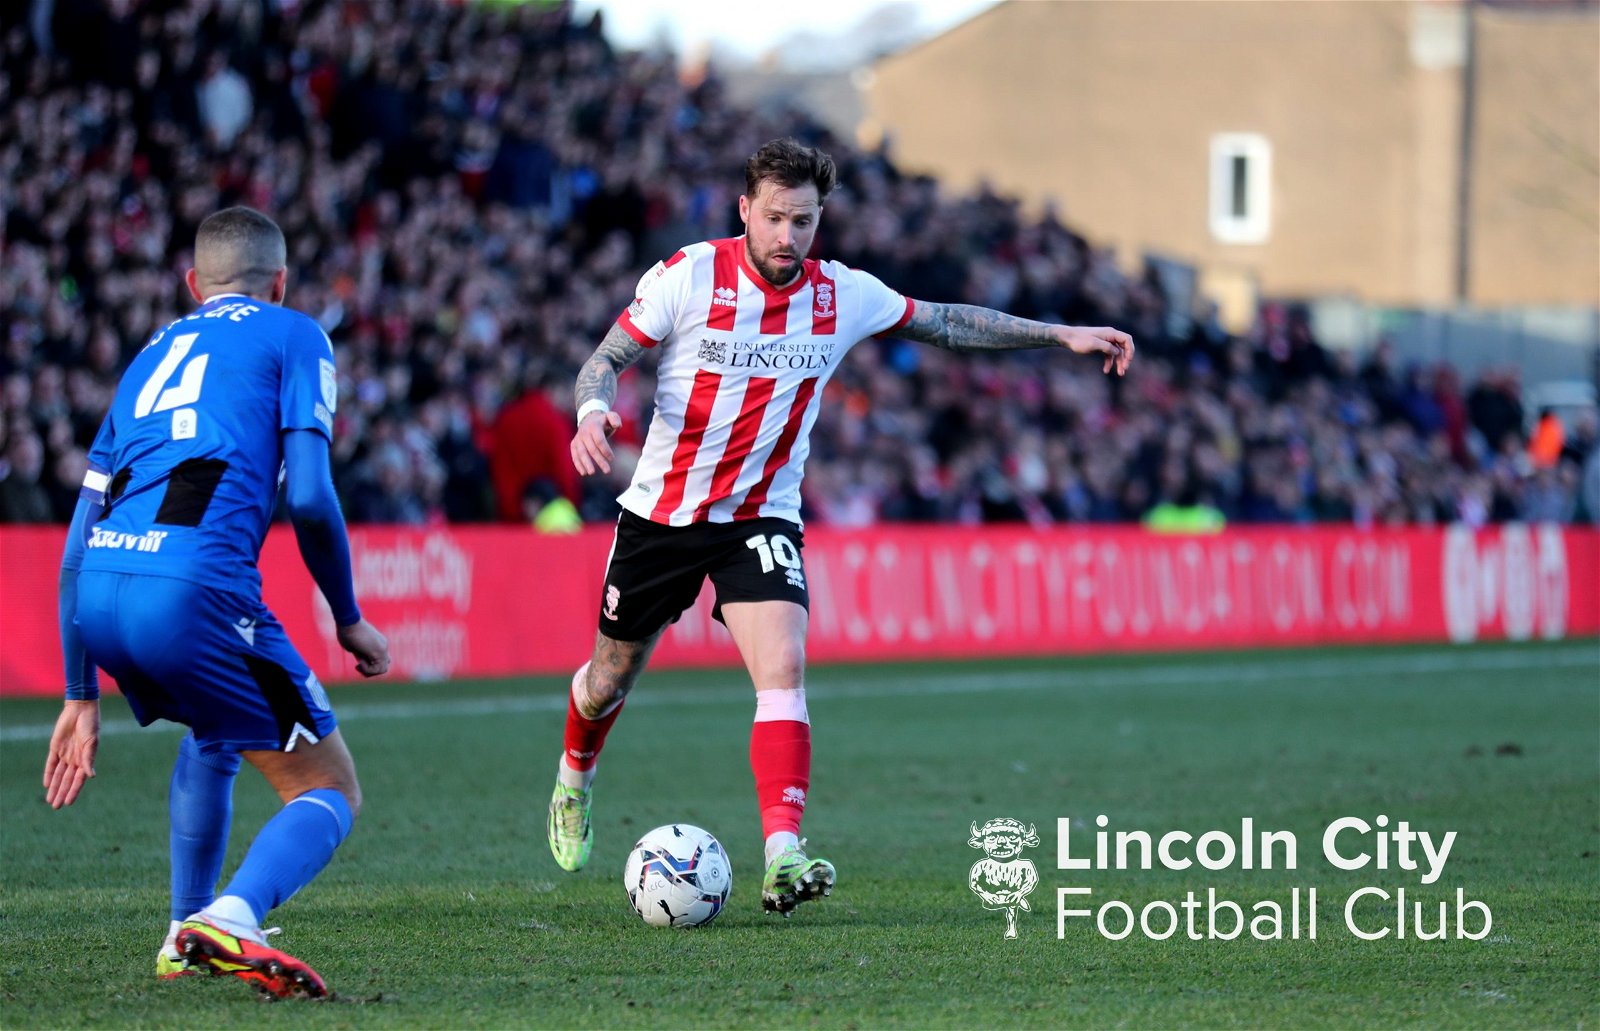 Lincoln City 0-2 Gillingham: Three Things We Learned